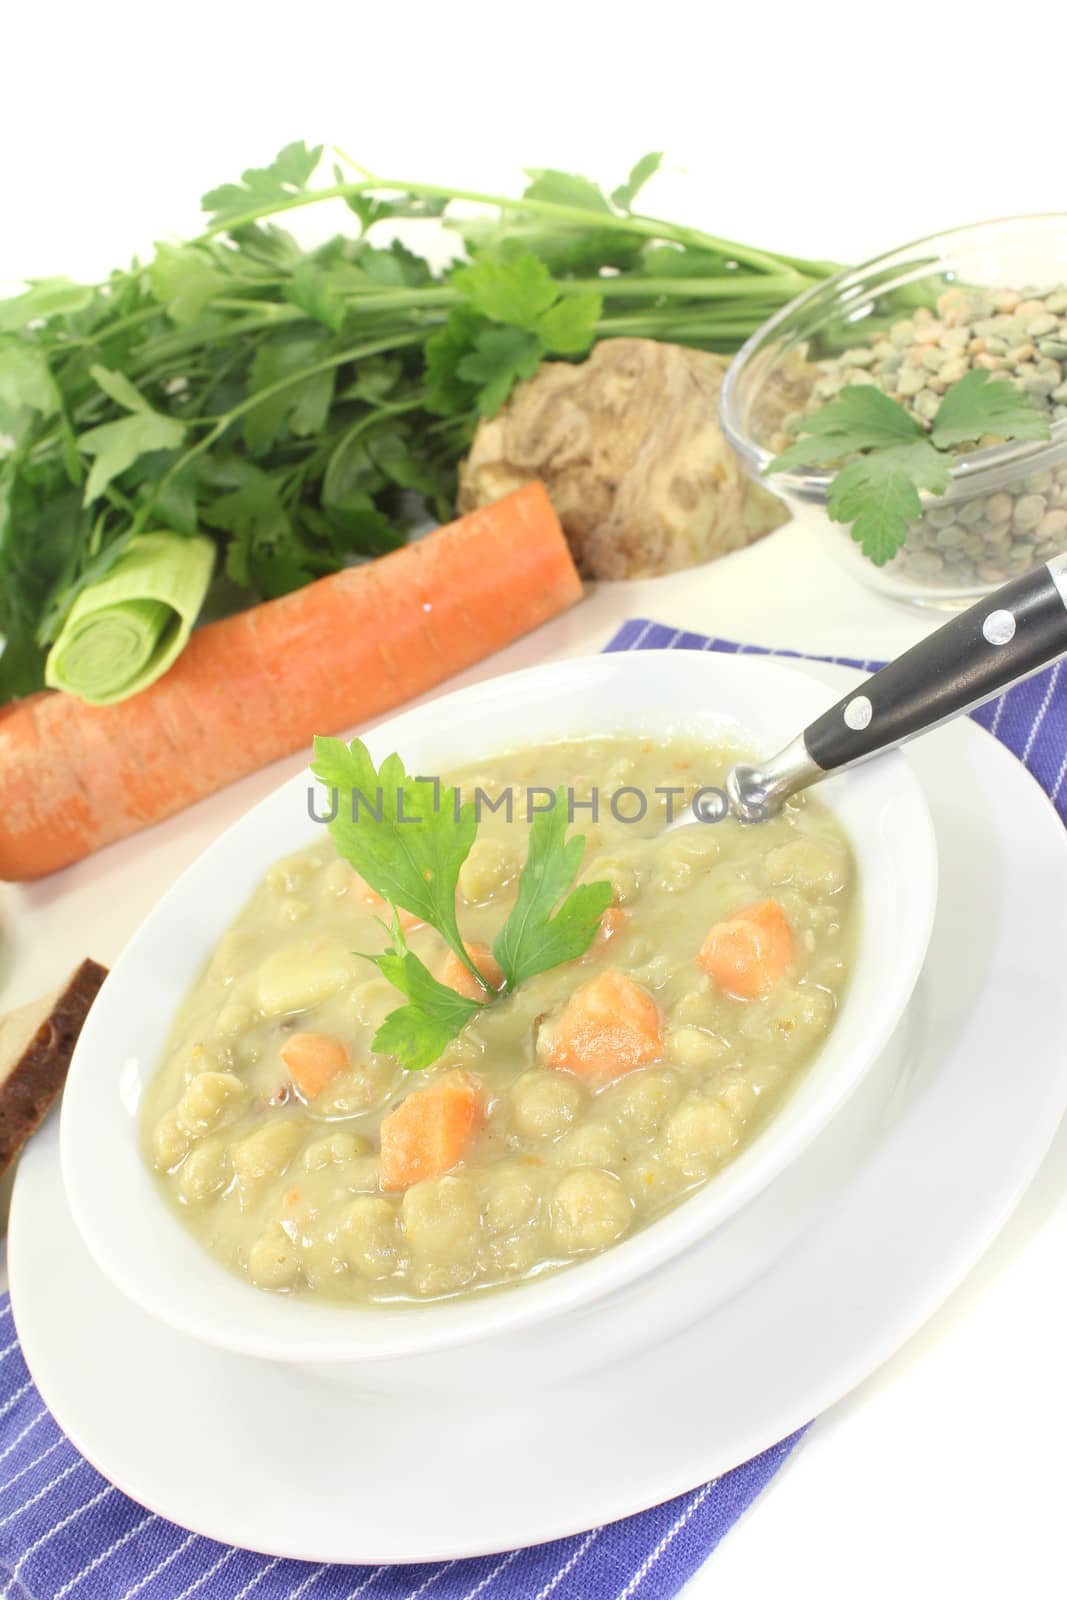 pea stew with bread and parsley on a light background